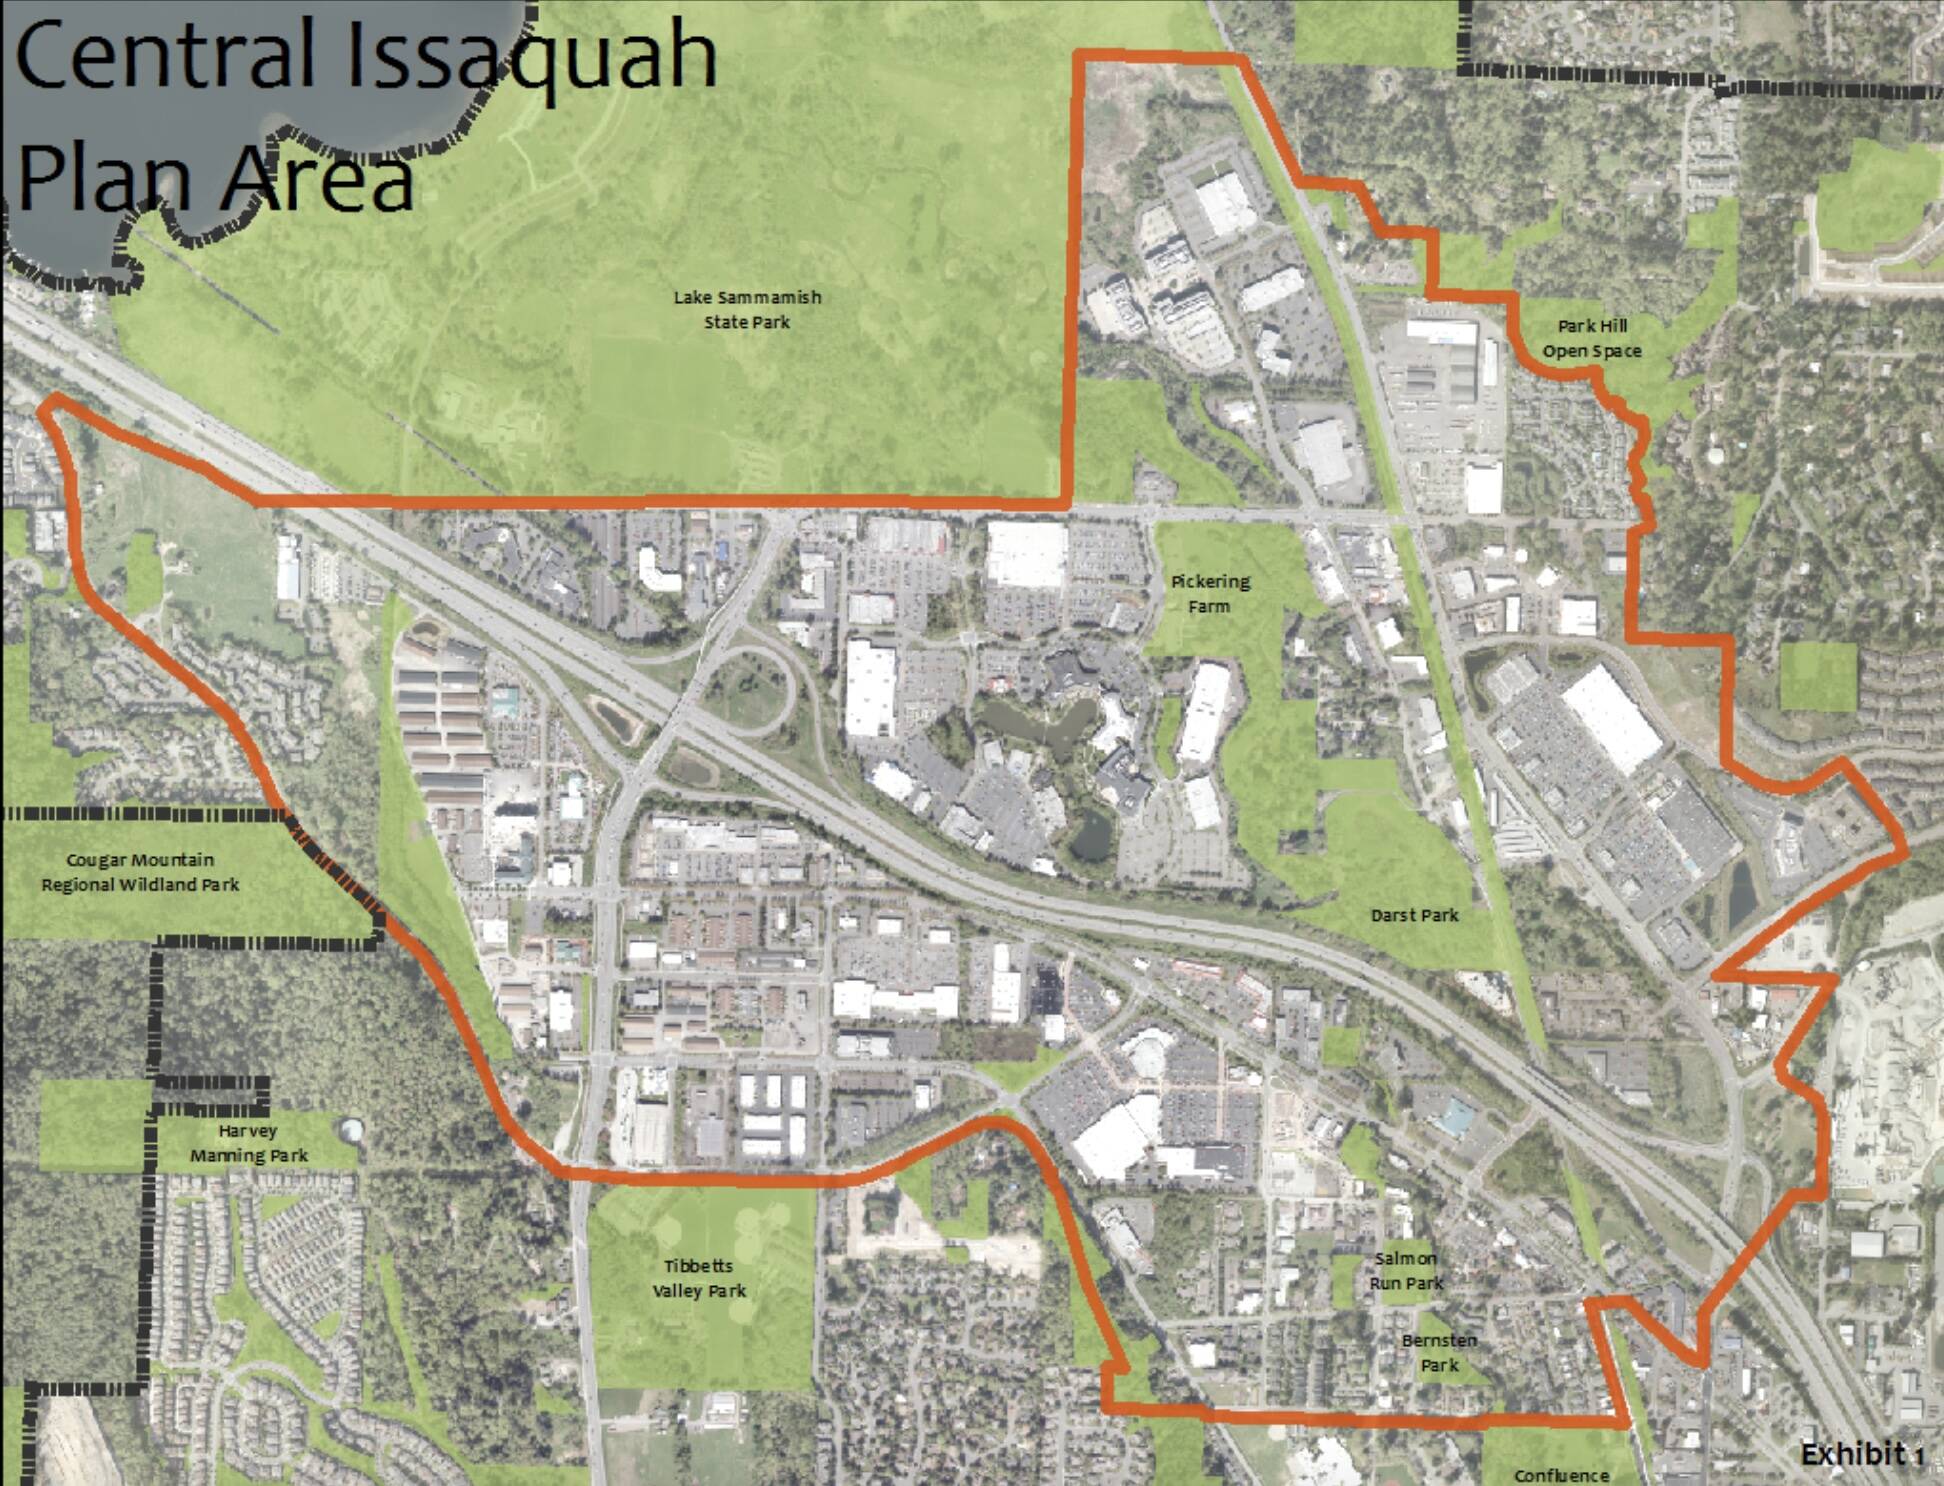 Central Issaquah Plan (City of Issaquah)